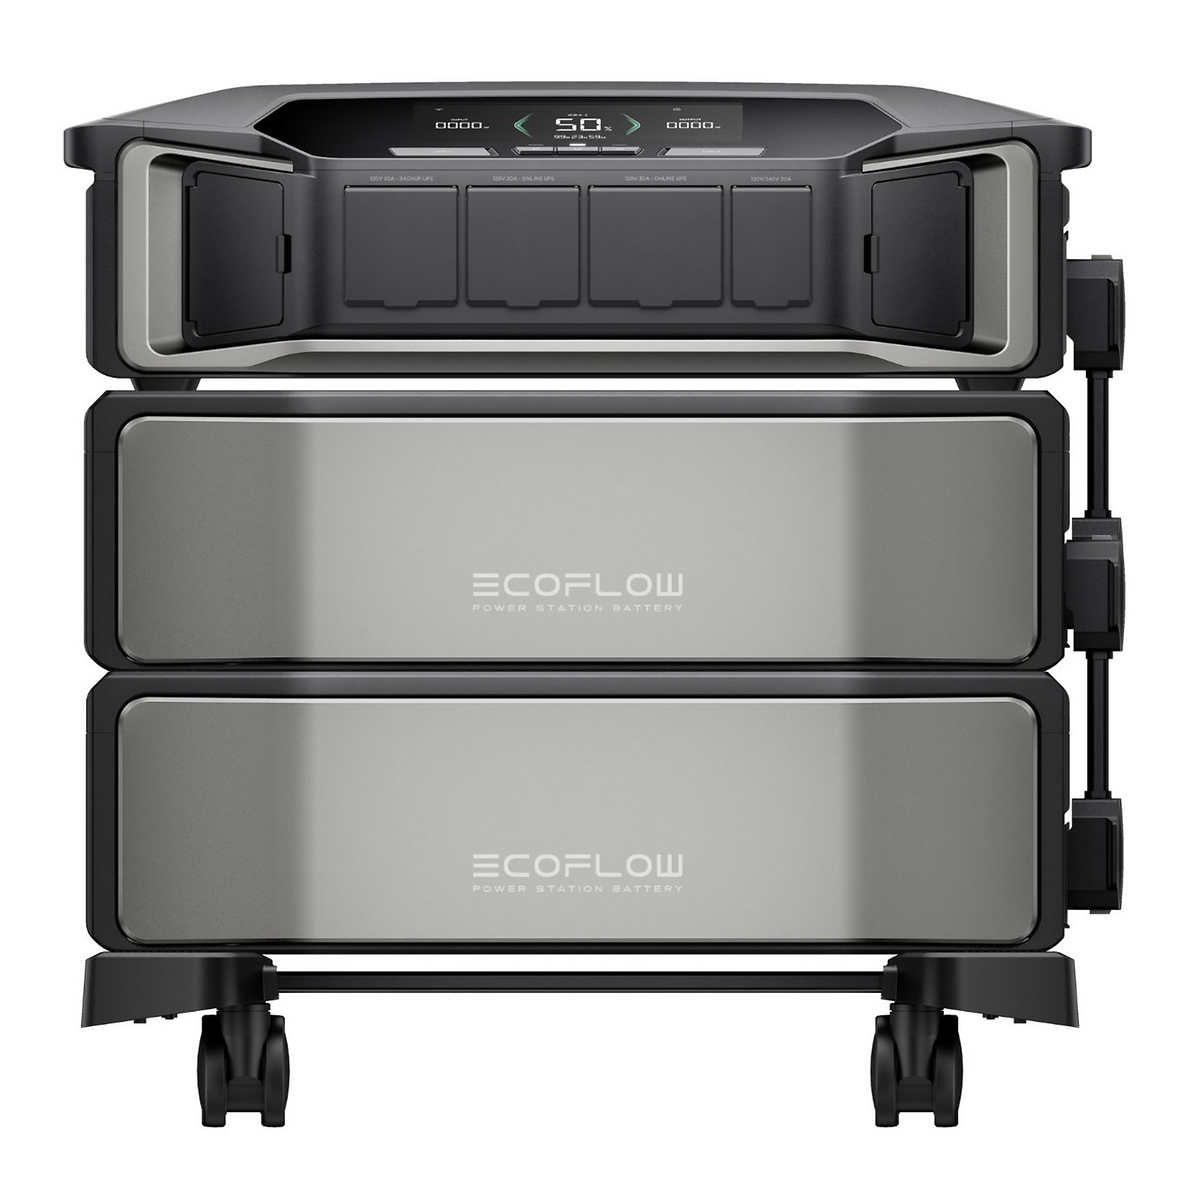 Costco Members: Ecoflow Delta Pro Ultra Whole-Home Power Solution (12 KWH Solution) $5999.99 + Free Shipping